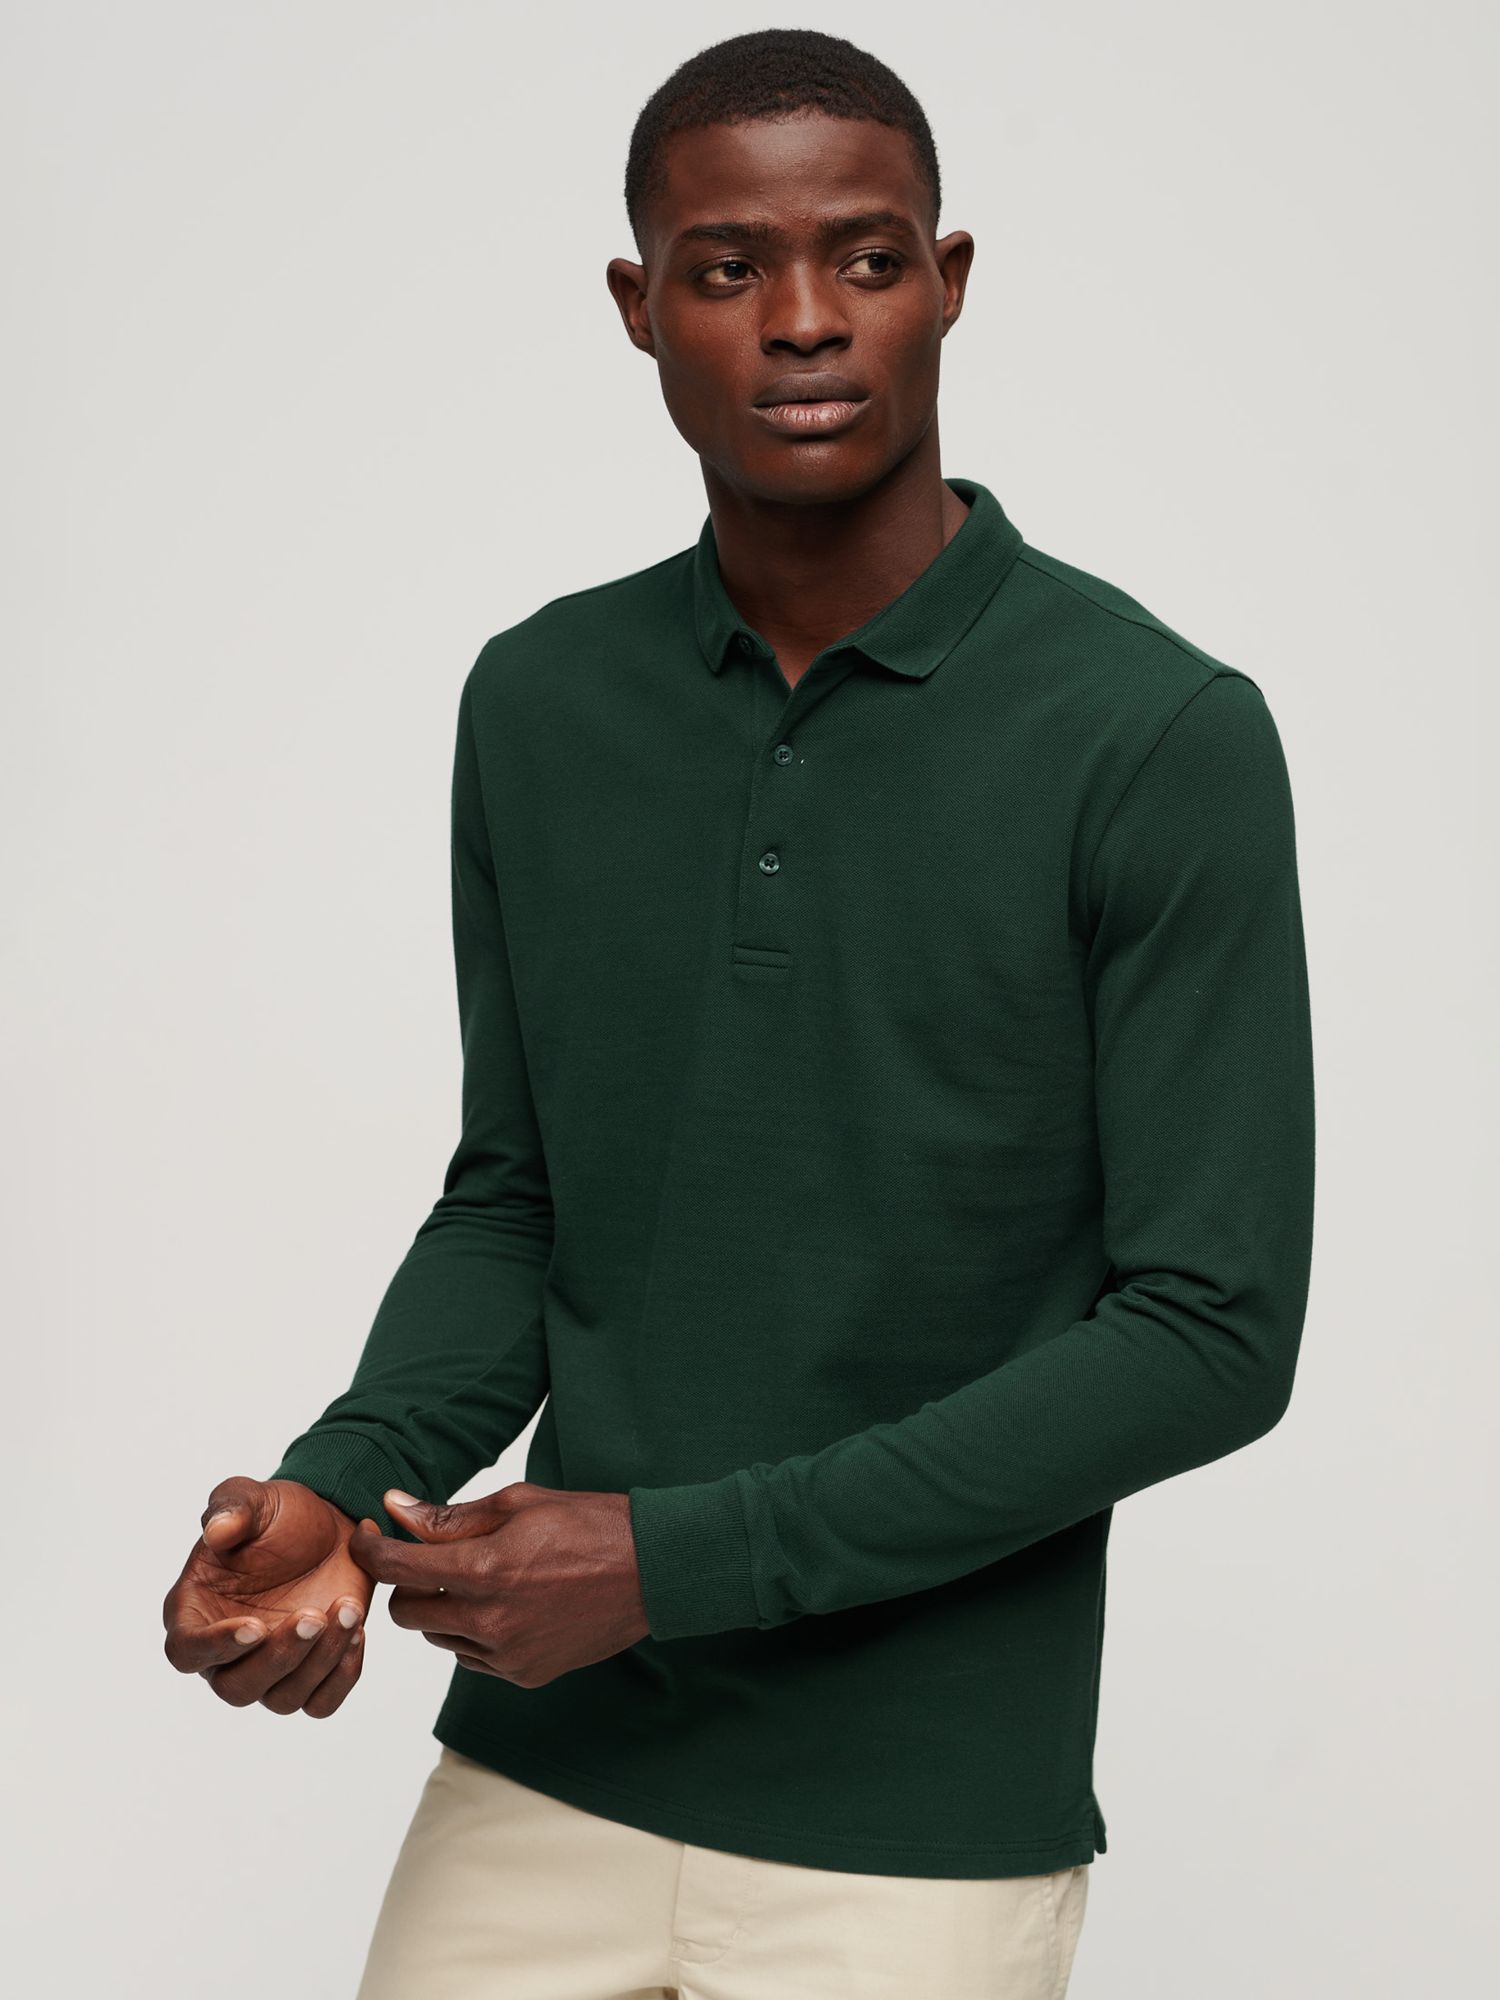 Superdry Long Sleeve Cotton Pique Polo Shirt, Forest Green, M